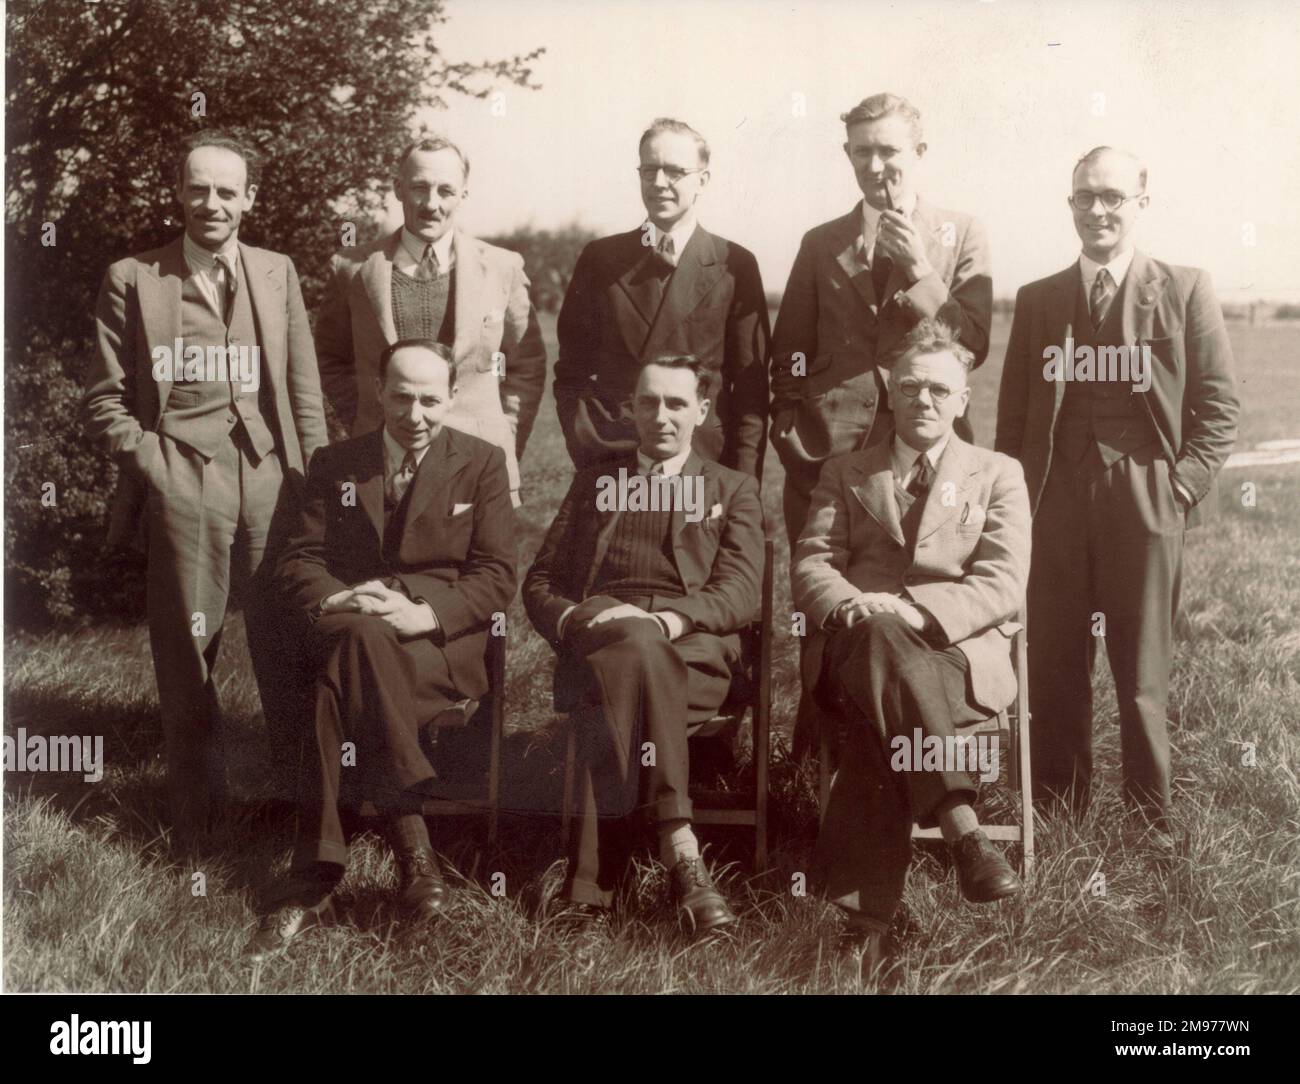 TDS.3 Group, 1941. Front row from left: Mickie Walker, Raoul Hafner and Sam Weller. Back row from left: Liscombe, ?, Fitzwilliams, (Charles?) Bradbury and ?. Stock Photo